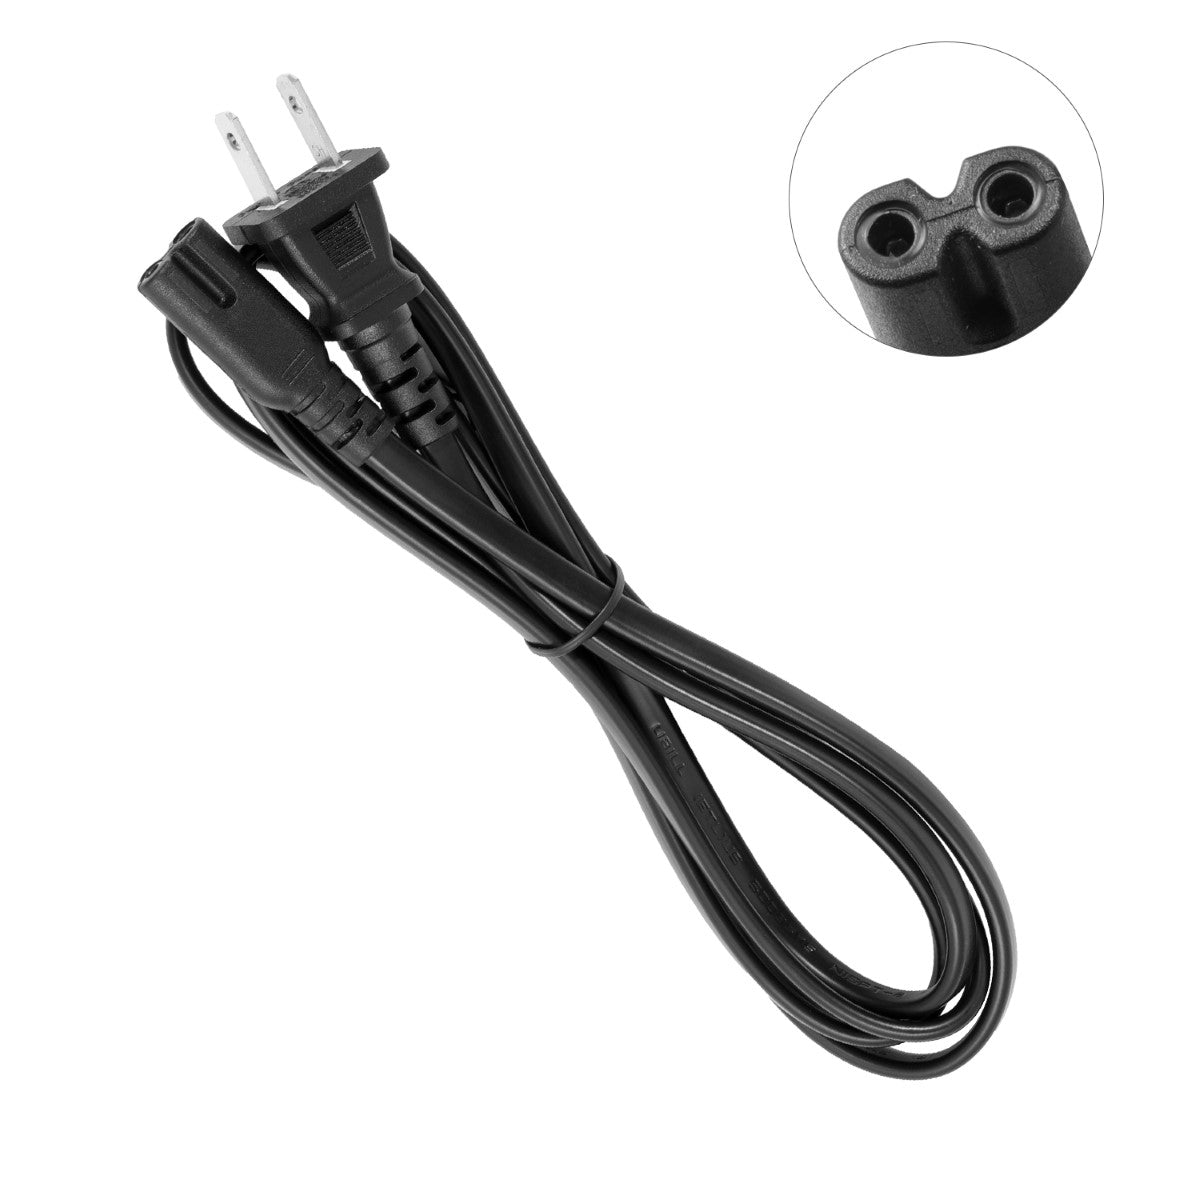 Power Cord for HP ENVY 4505 e-All-in-One Printer.